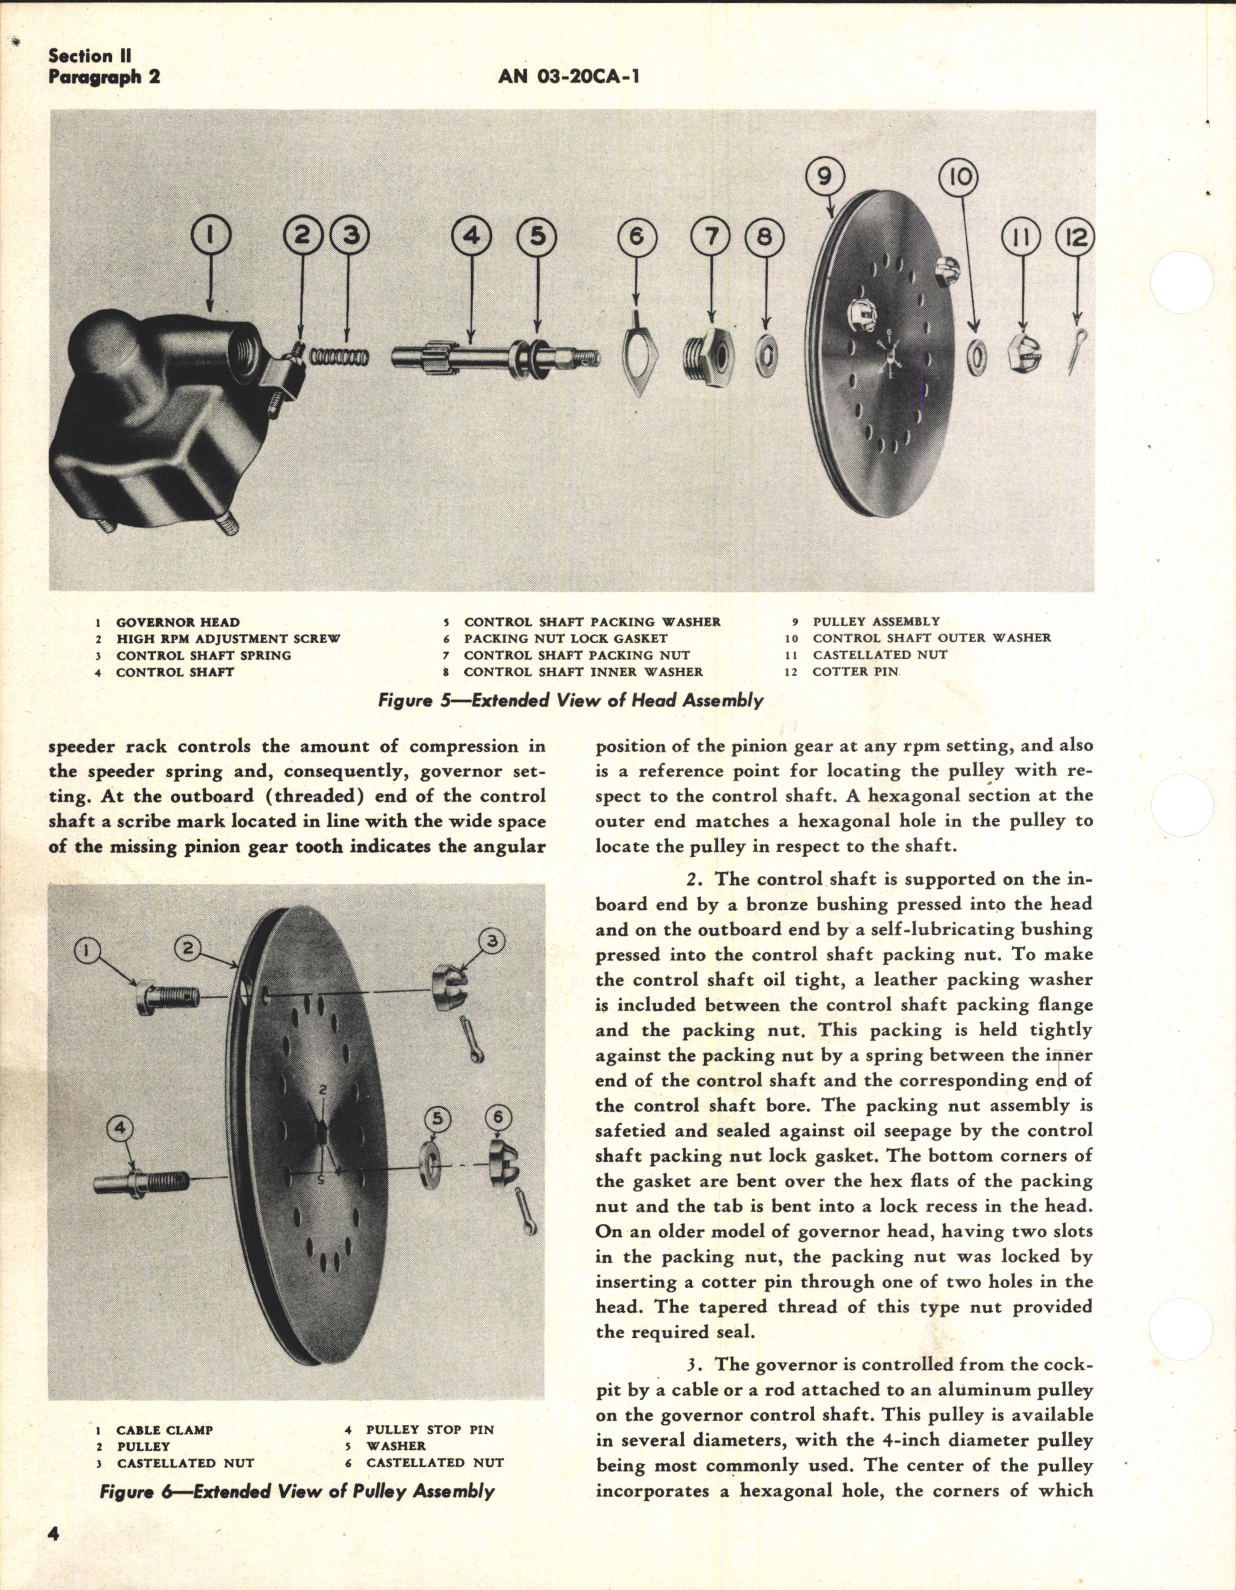 Sample page 8 from AirCorps Library document: Handbook of Instructions with Parts Catalog for Constant Speed Propeller Governors and Controls for Counterweight Propellers